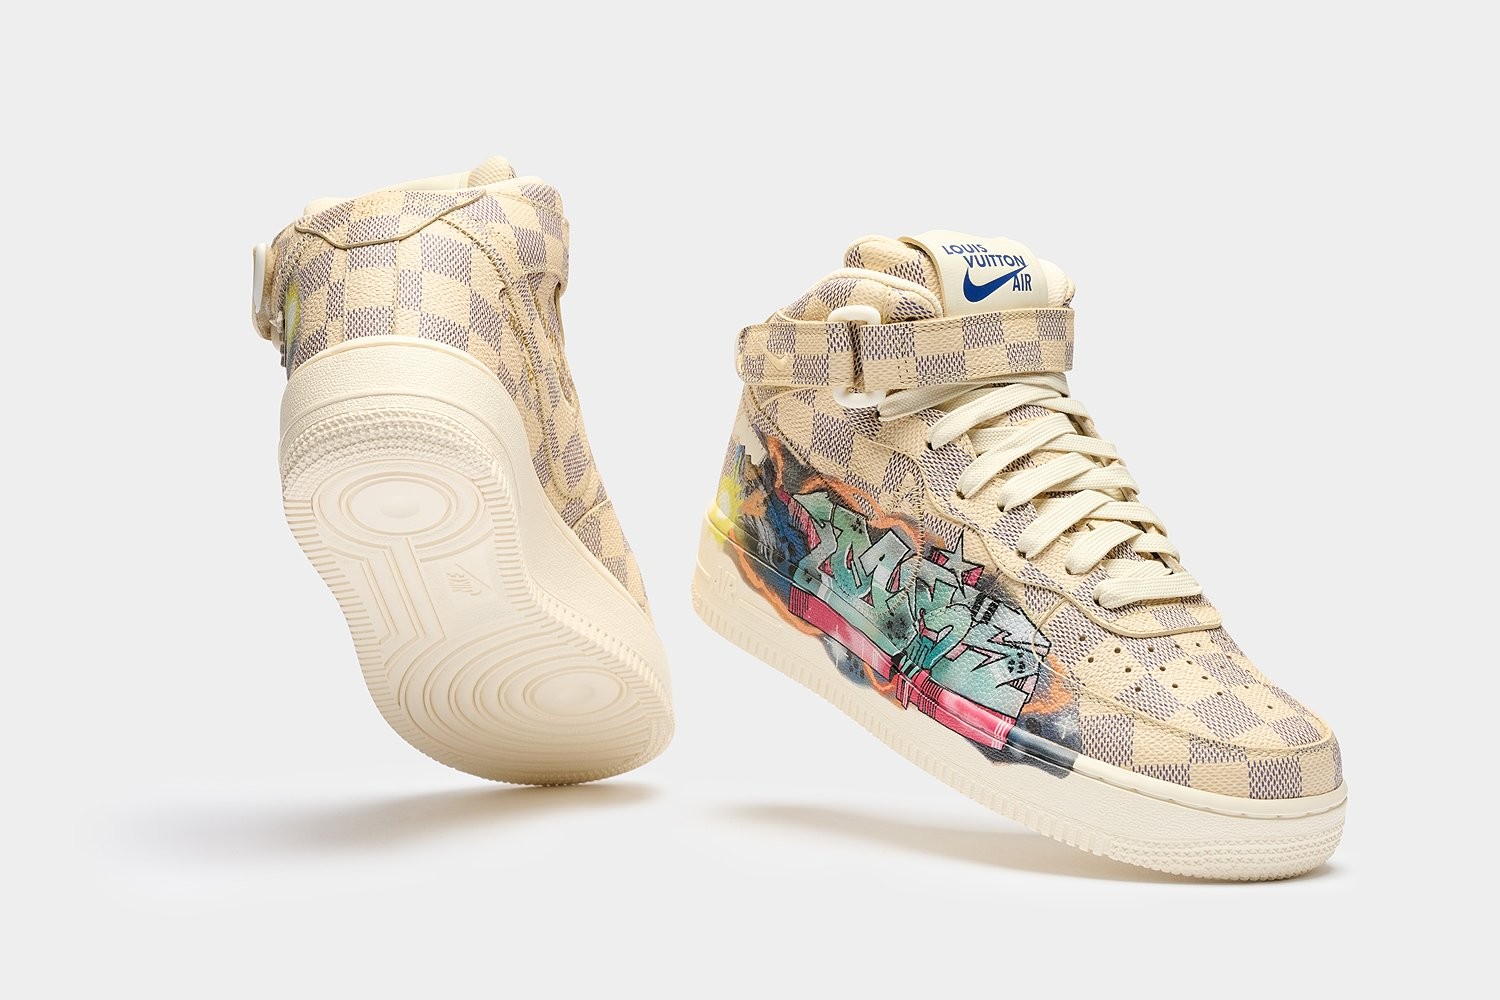 A complete series of nine Louis Vuitton and Nike “Air Force 1” by Virgil Abloh - Image 23 of 50